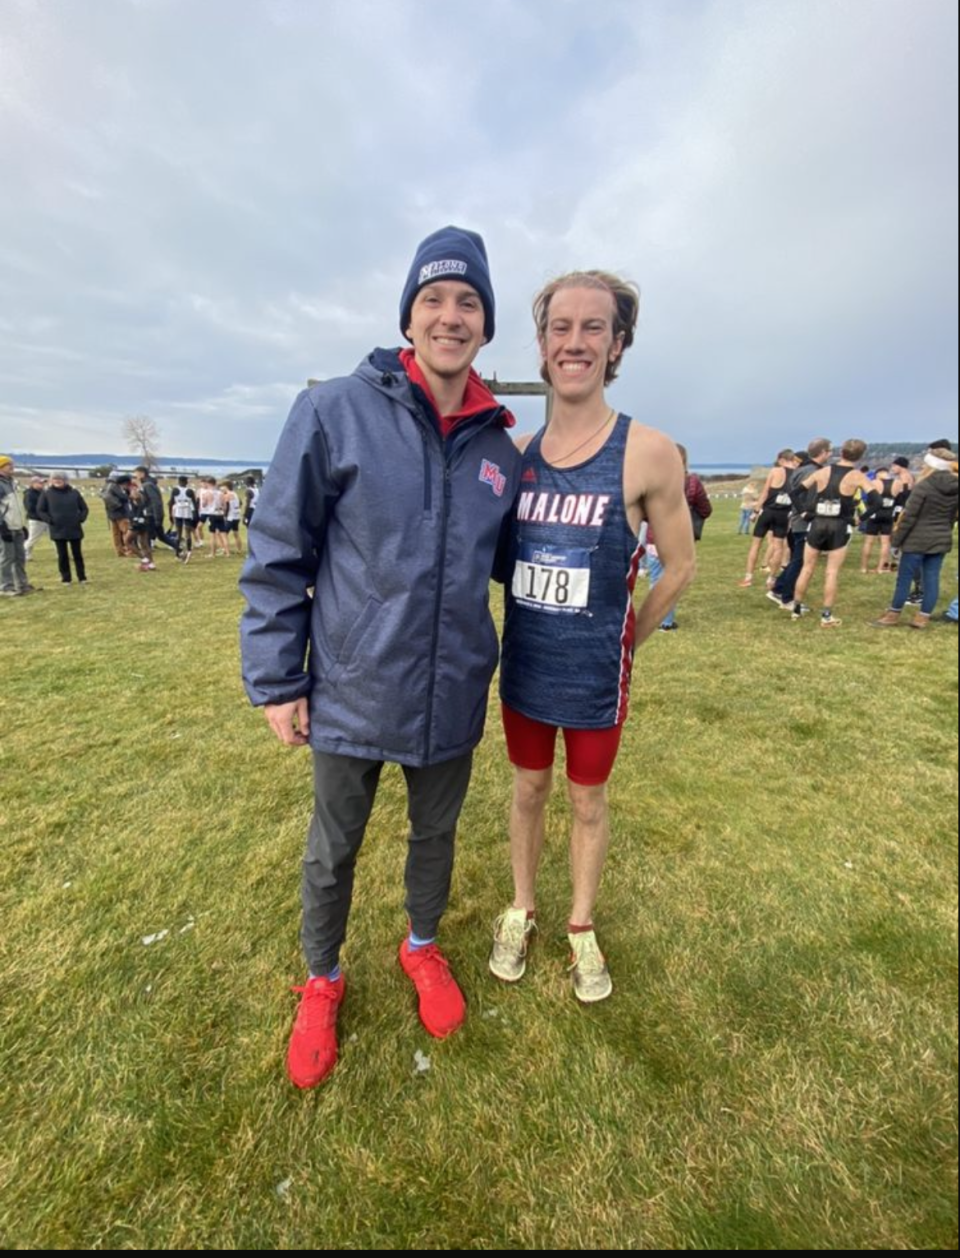 Max Gucker (right) is pictured with Malone men's cross country head coach Noah Schaub.